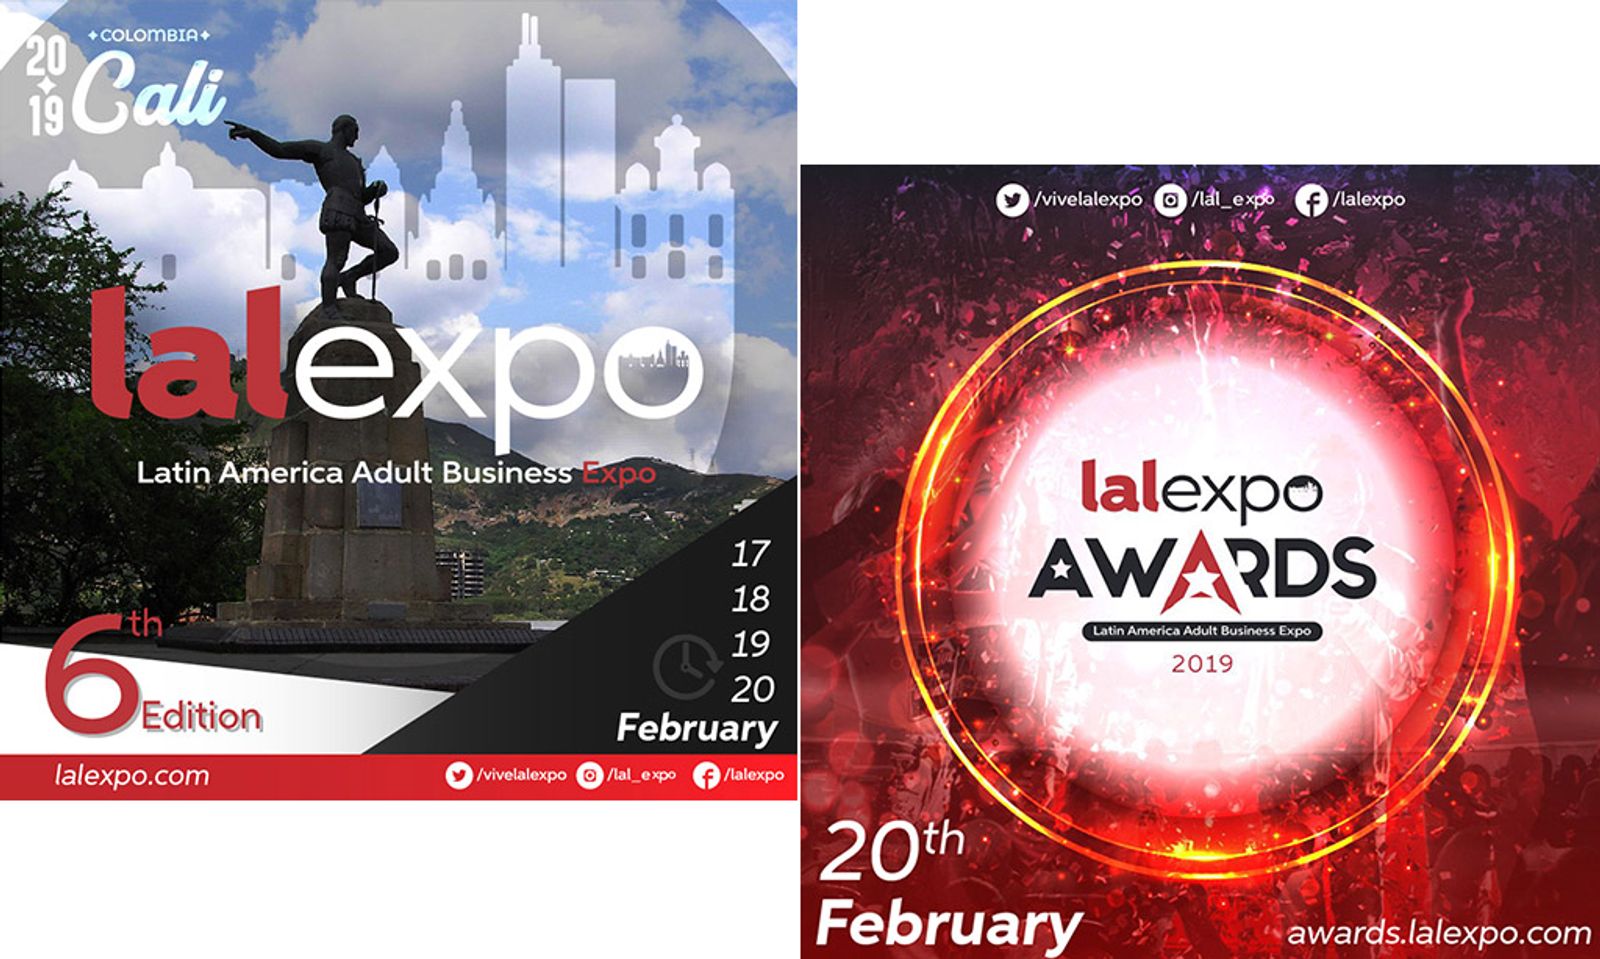 Lalexpo 2019 Reveals Networking and Party Schedule